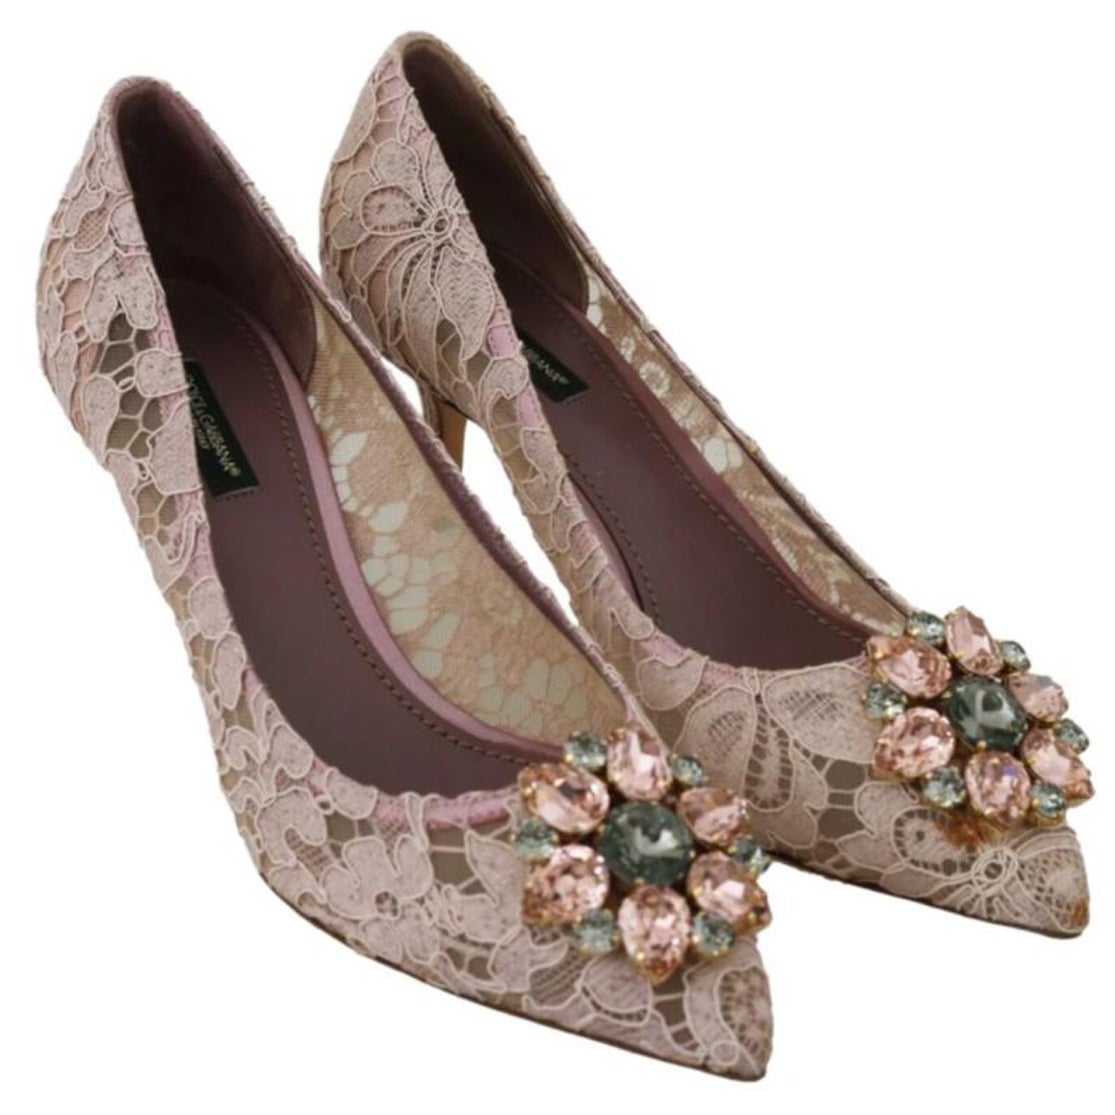 Dolce & Gabbana Pink Floral Lace Viscose Heels Pumps Shoes Crystals Leather Sole